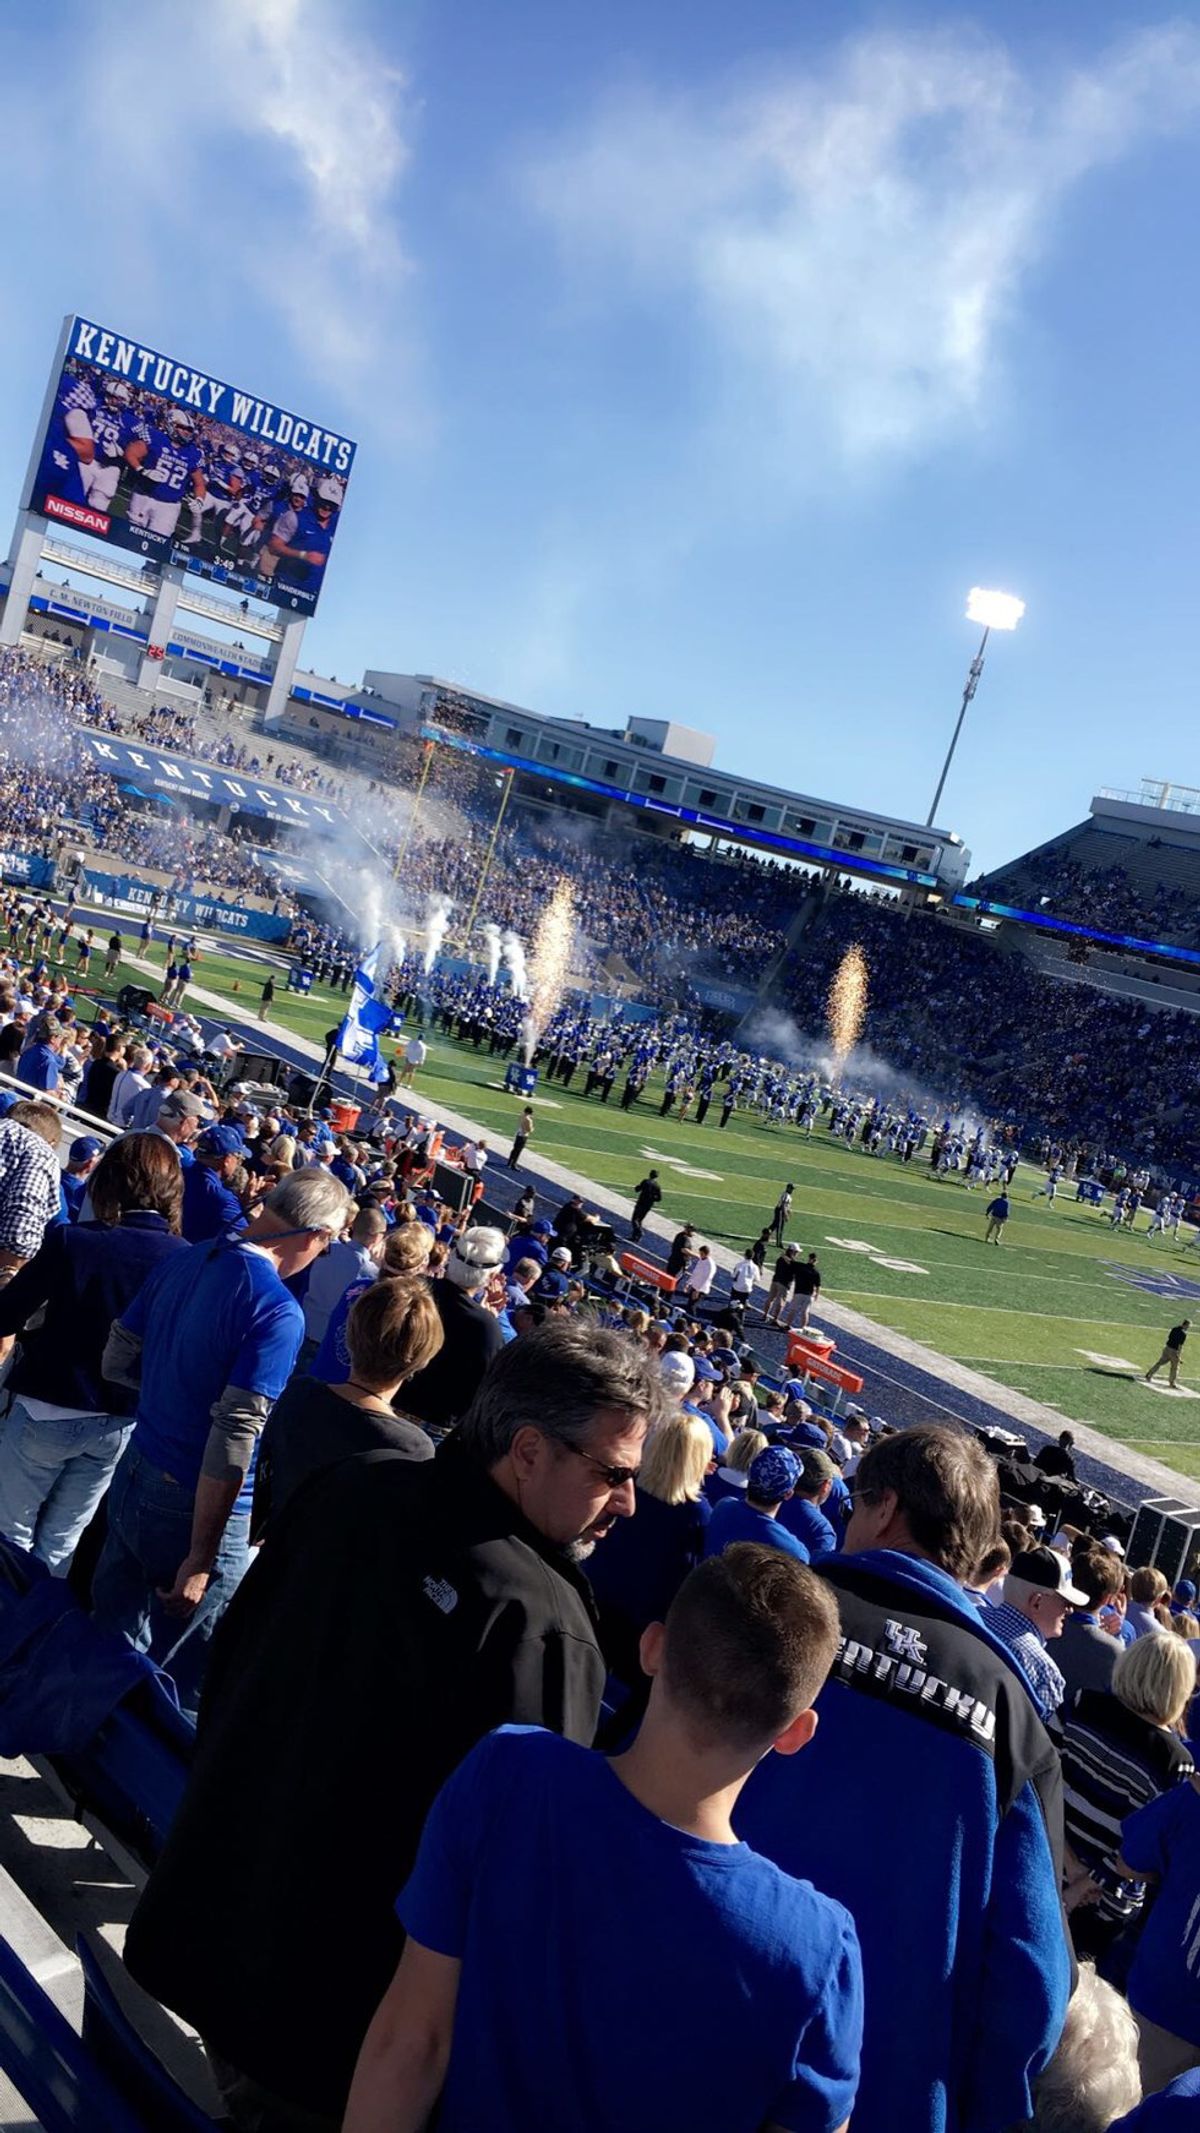 8 Things Girls At The University Of Kentucky Wear